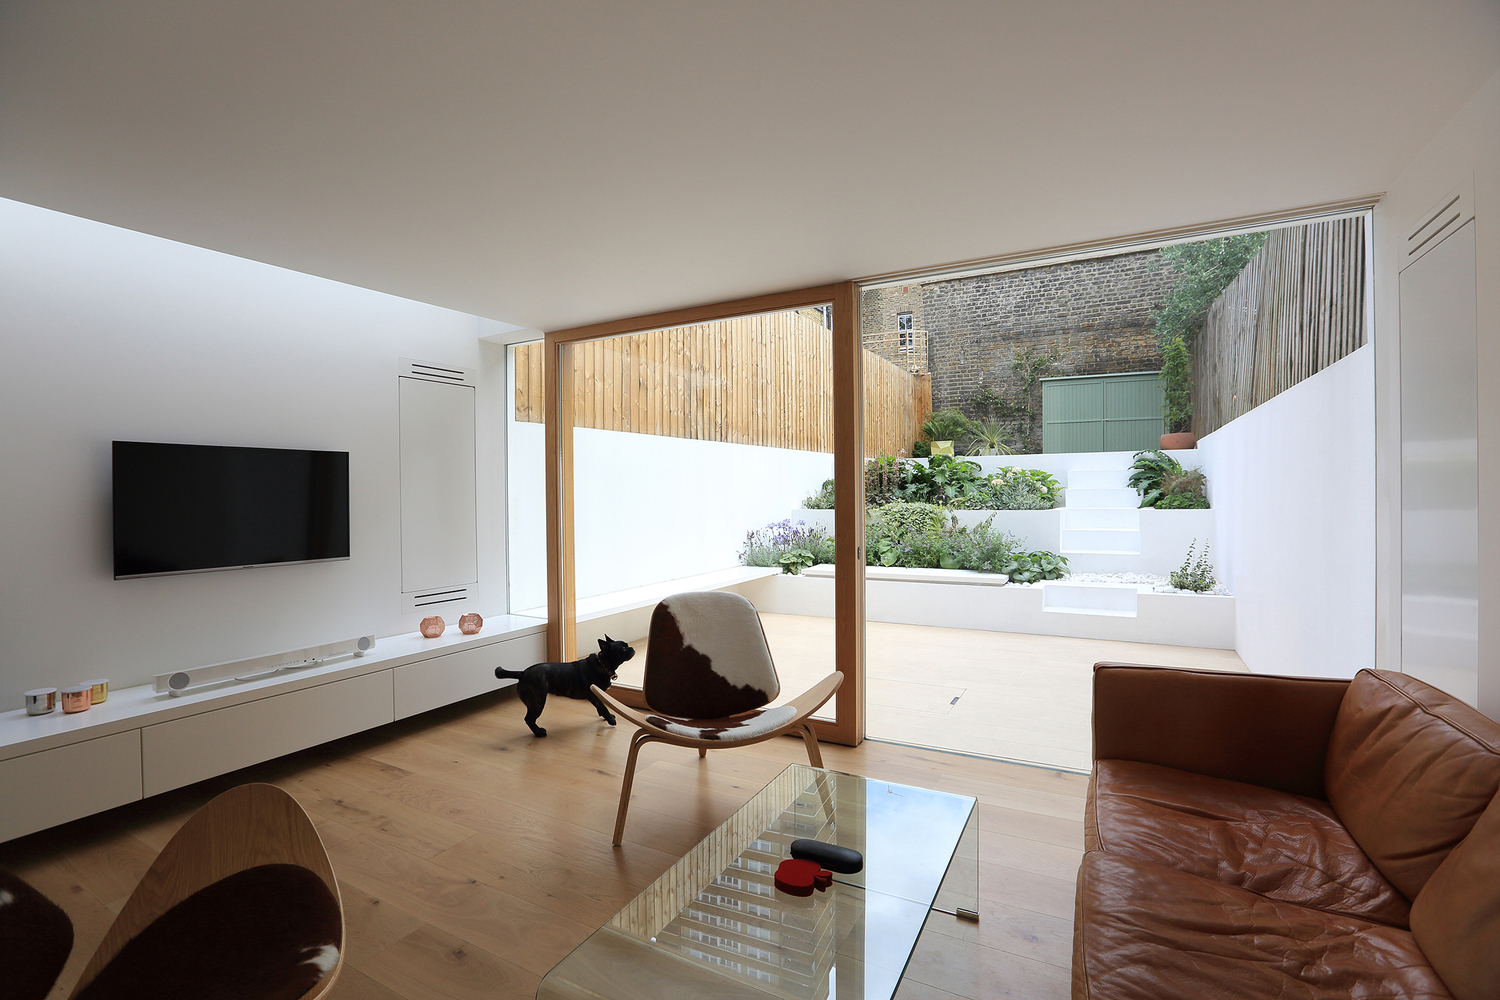 Extension to a Private House  Tamir Addadi Architecture